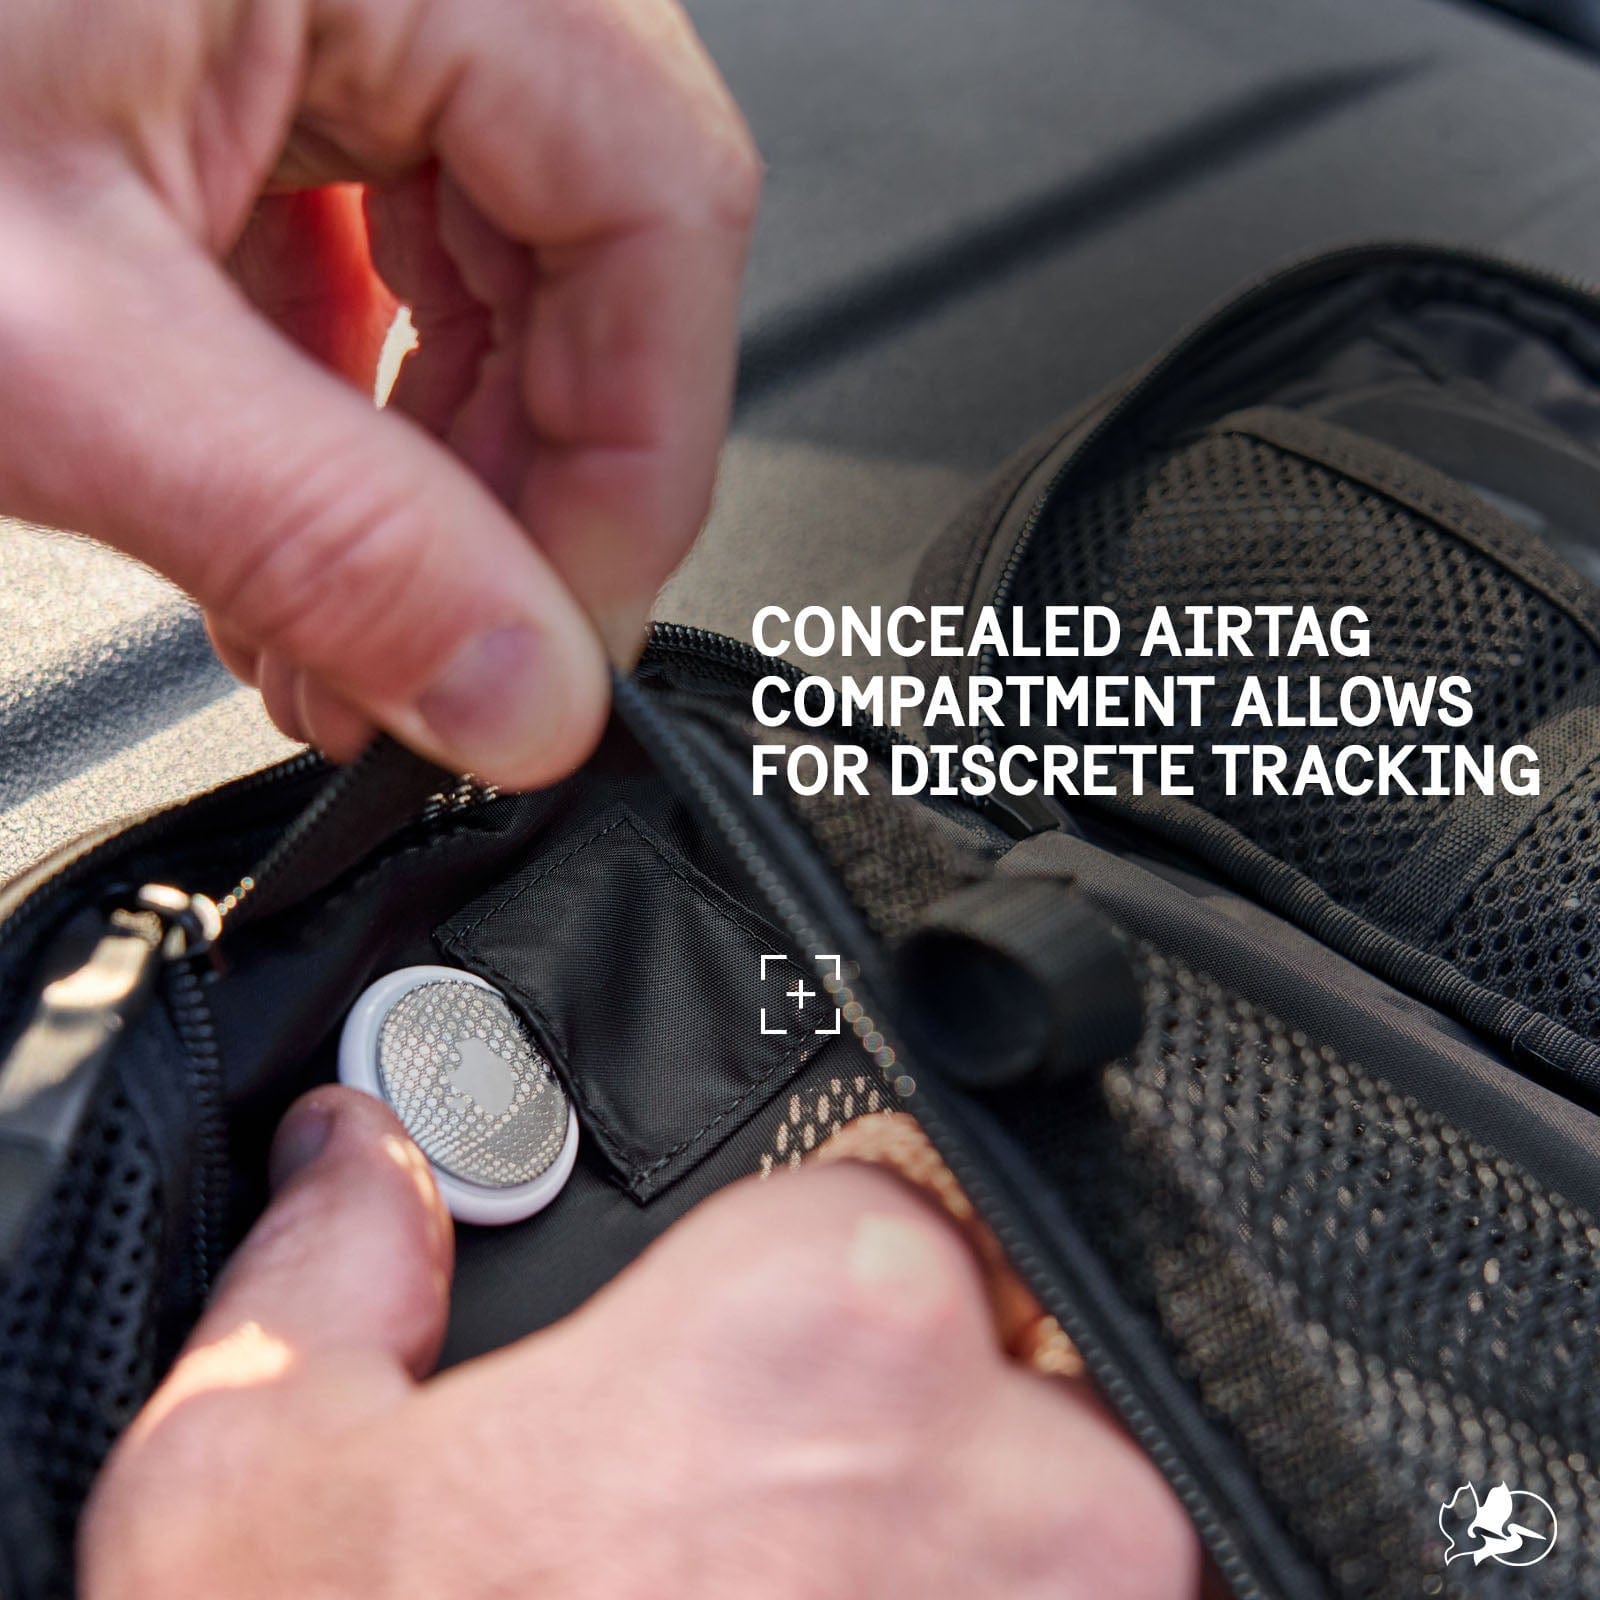 CONCEALED AIRTAG COMPARTMENT ALLOWS FOR DISCRETE TRACKING